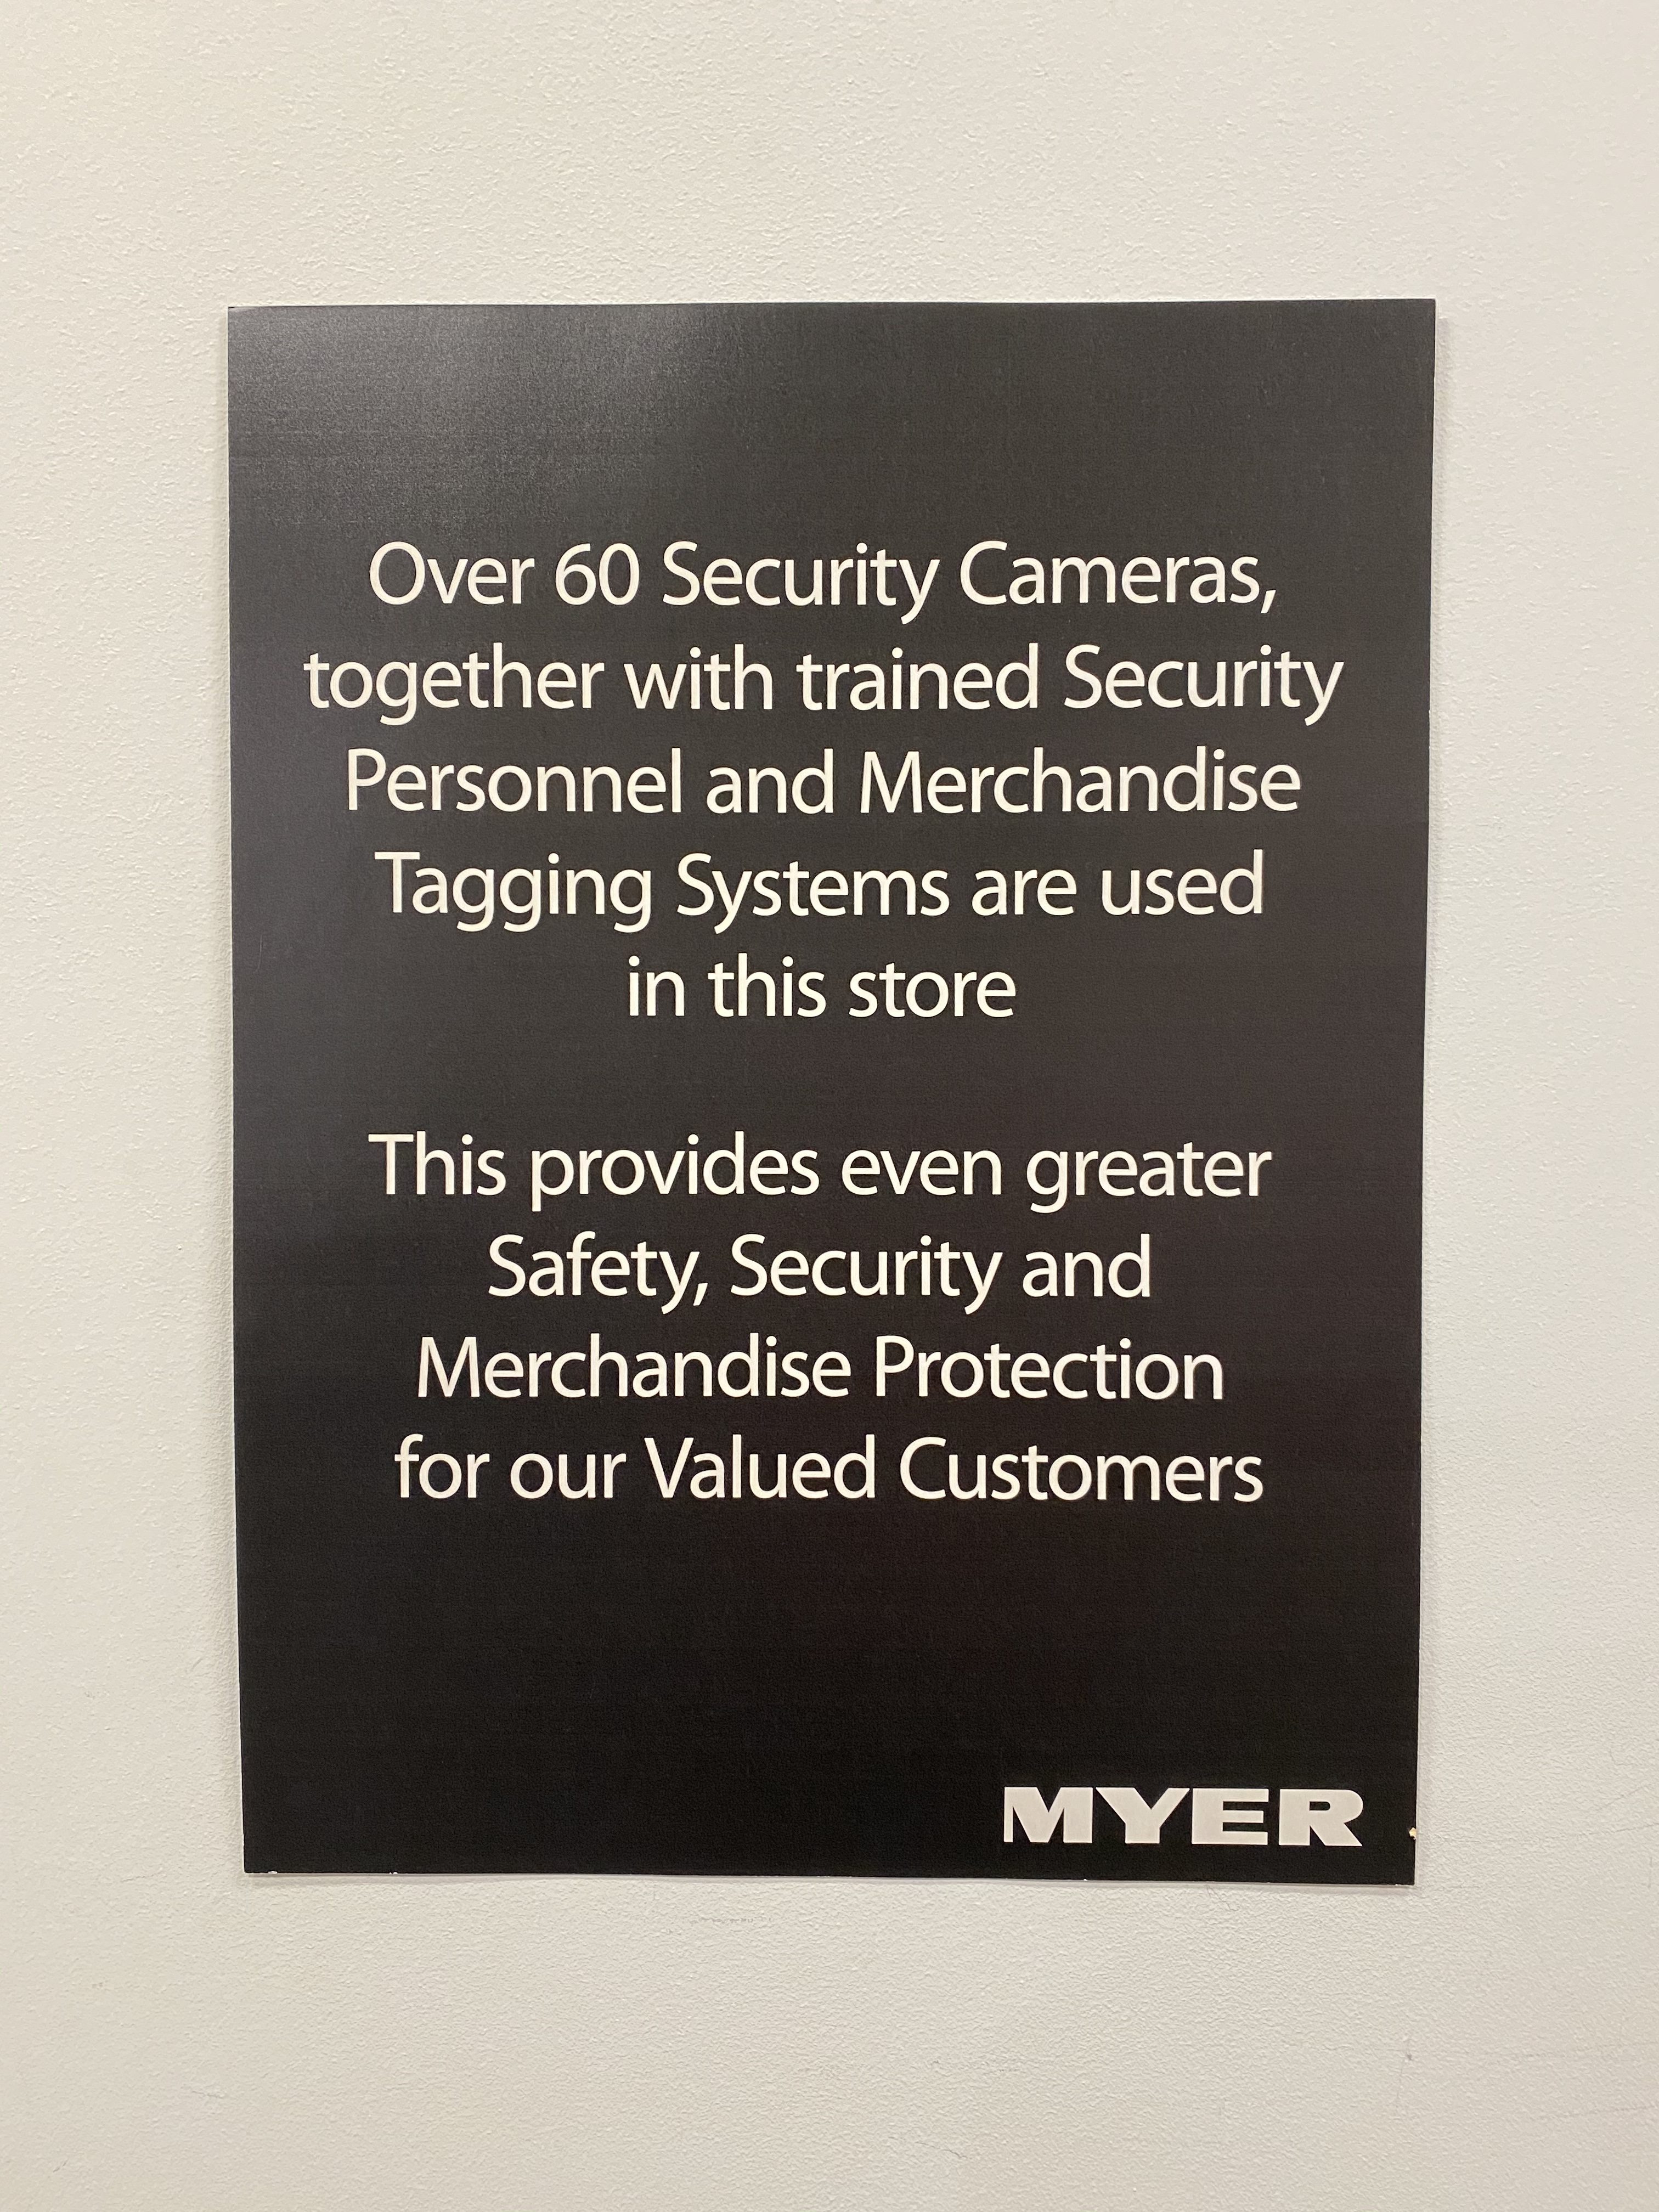 Over 60 Security Cameras, together with trained Security Personnel and Merchandise Tagging Systems are used in this store This provides even greater Safety, Security and Merchandise Protection for our valued customers